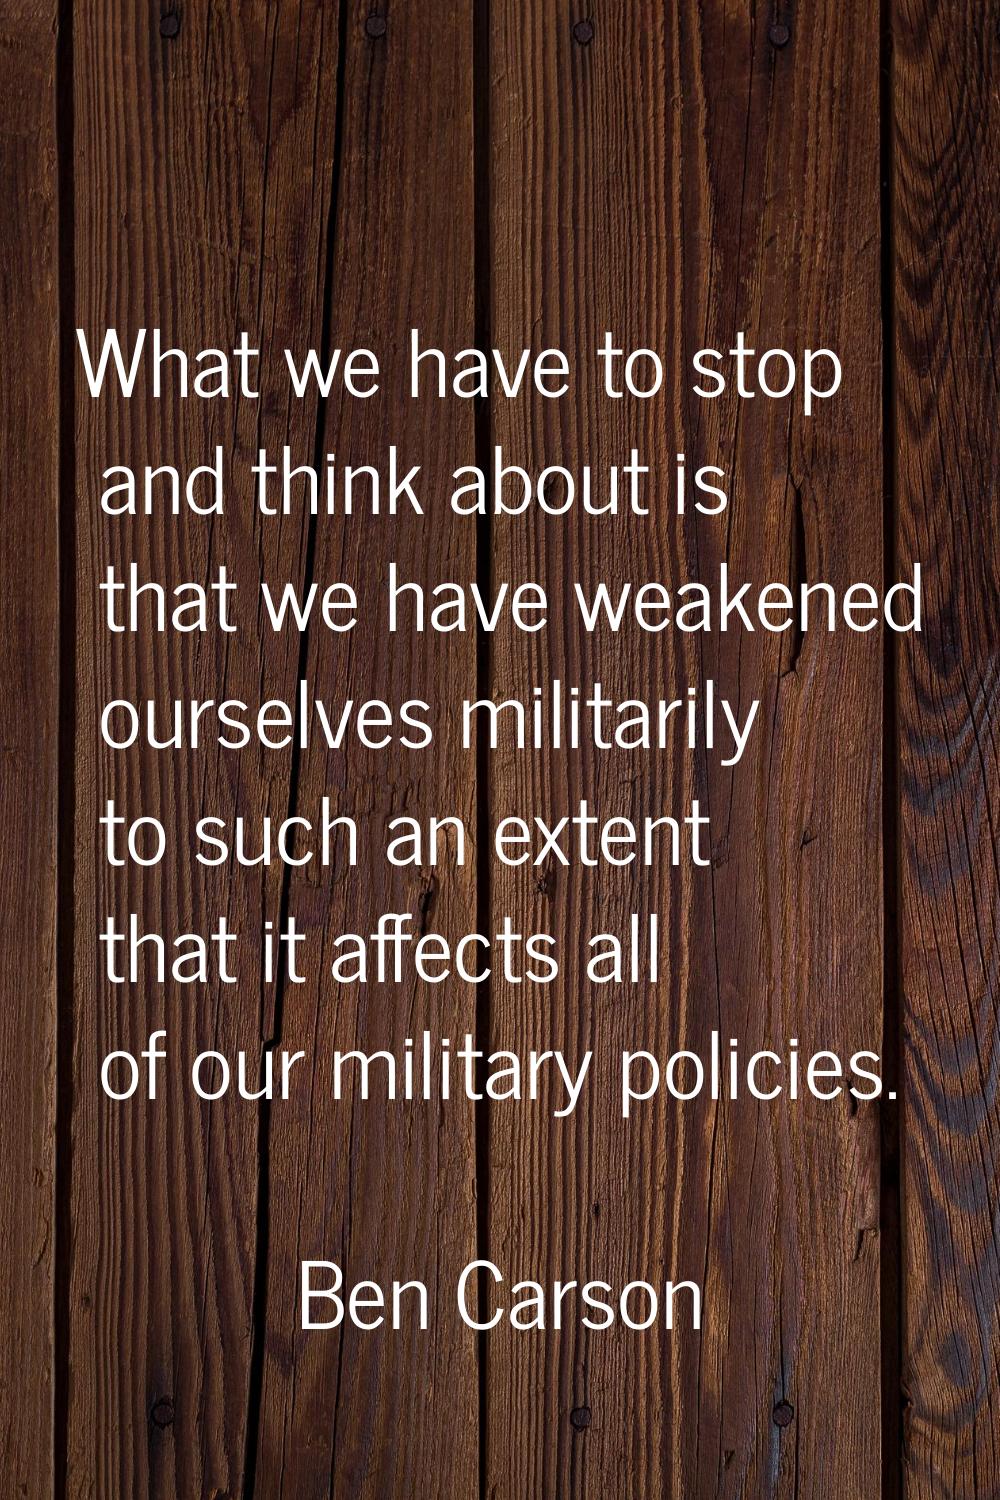 What we have to stop and think about is that we have weakened ourselves militarily to such an exten